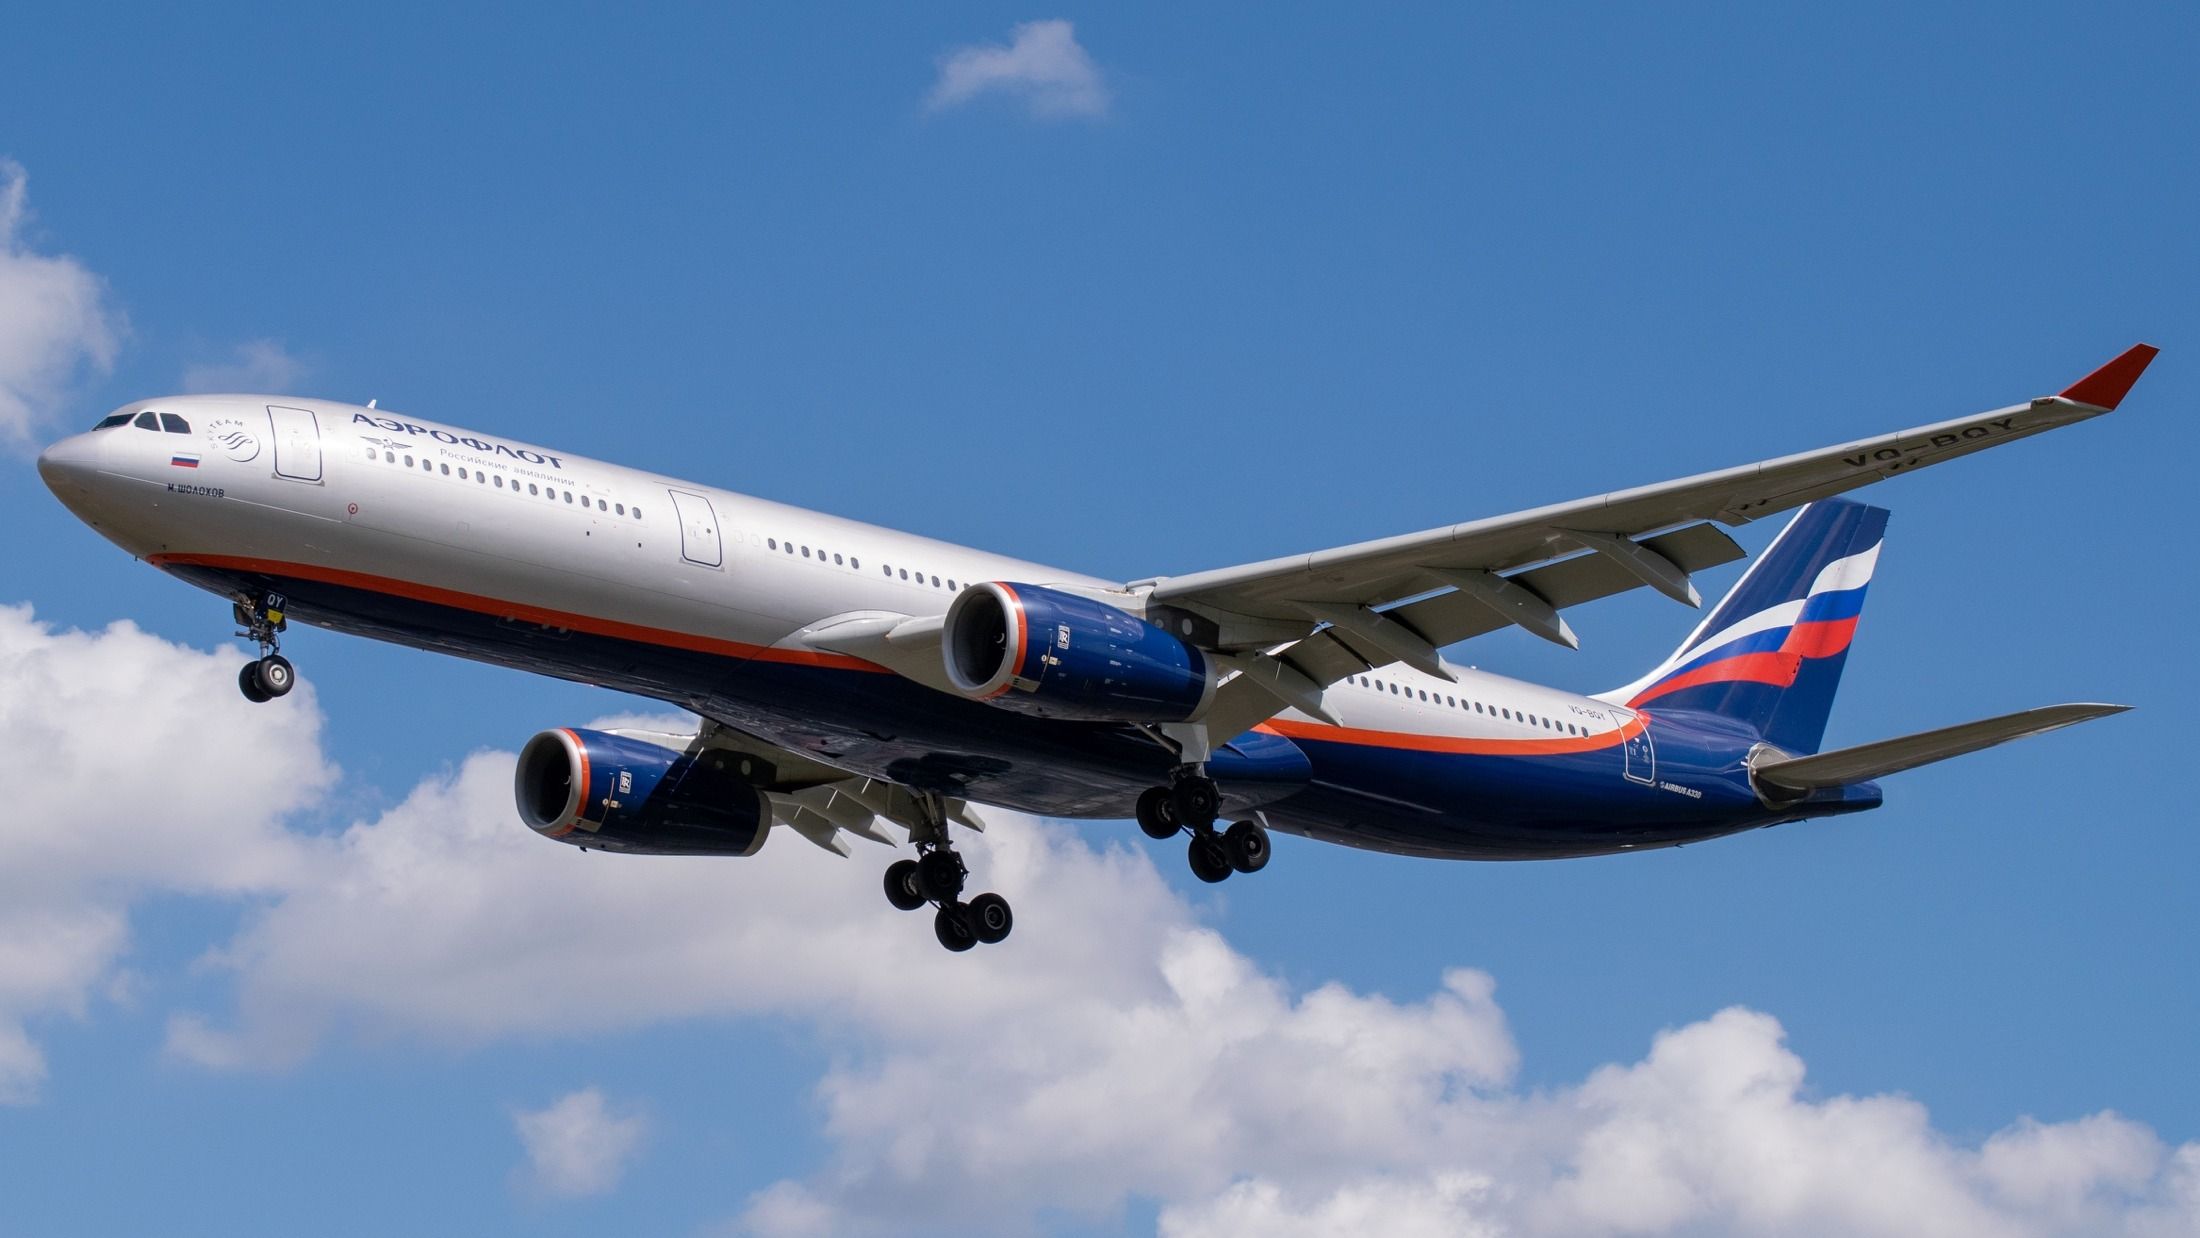 Lessor Receives $710 Million Payout Over Aeroflot Aircraft Leases